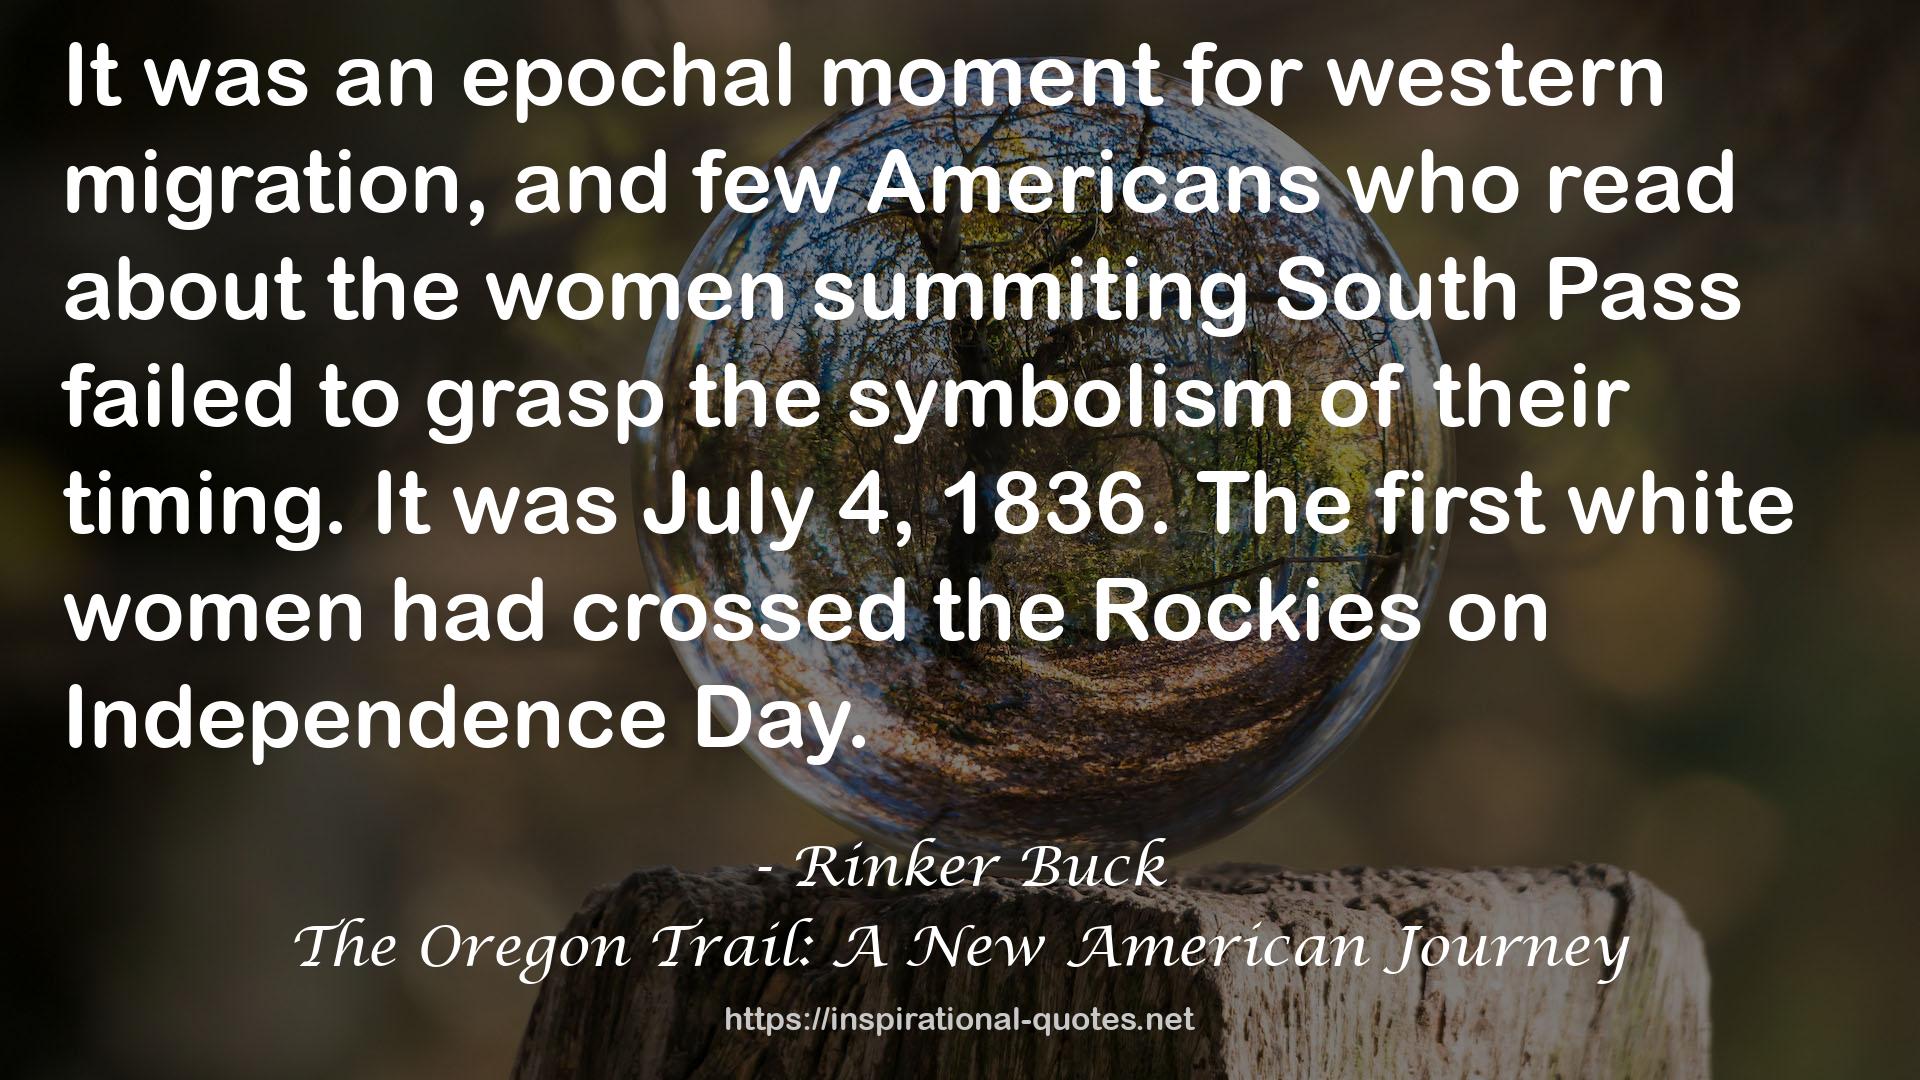 Rinker Buck QUOTES